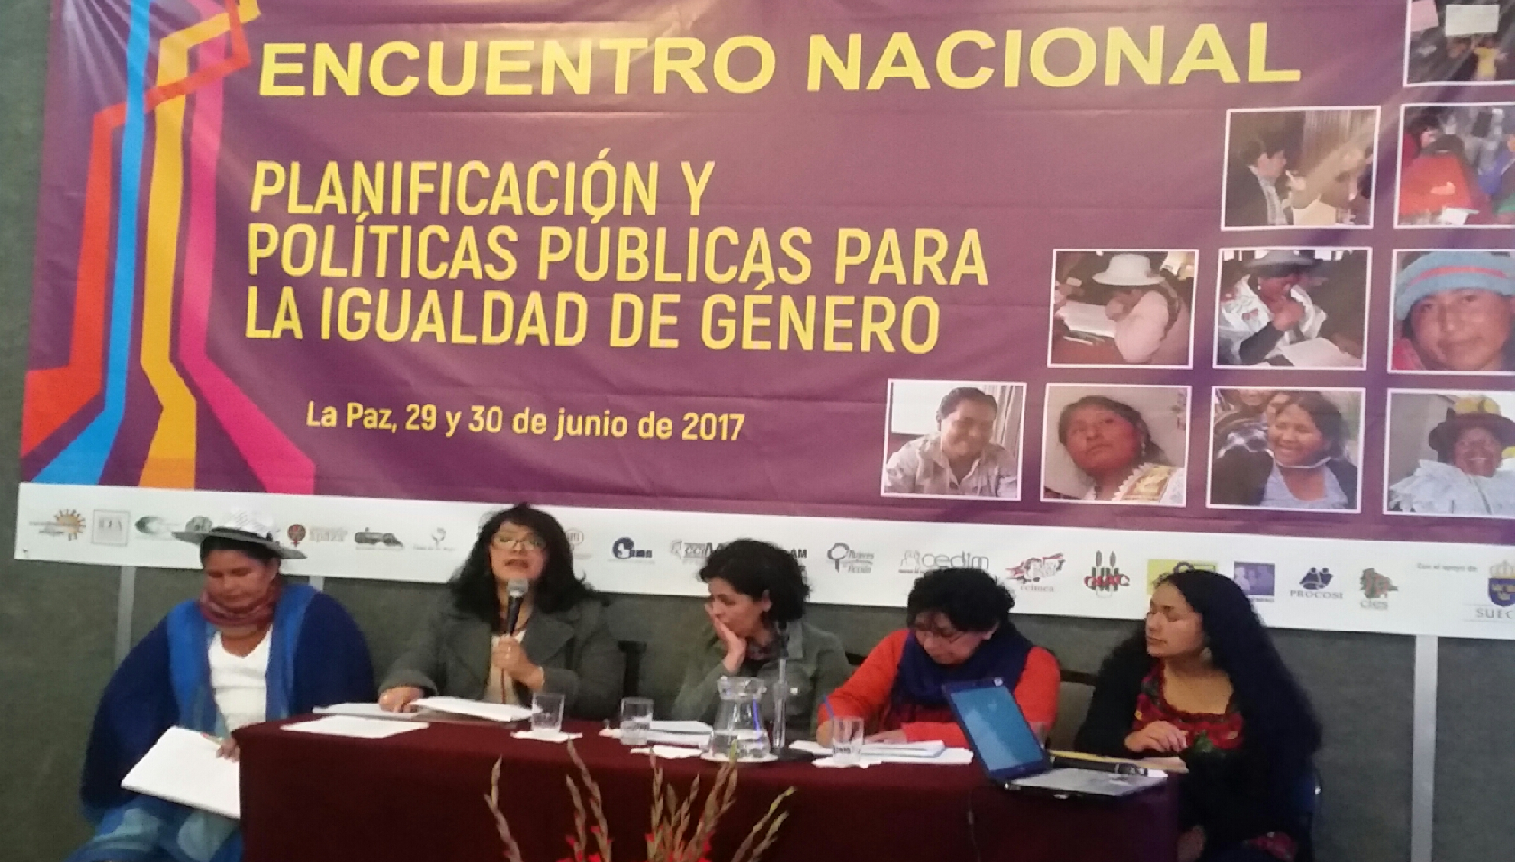 International IDEA Participates at the National Meeting on Planning and Public Policies for Gender Equality, which took place in La Paz, Bolivia on 29-30 June 2017.  Photo credit: International IDEA